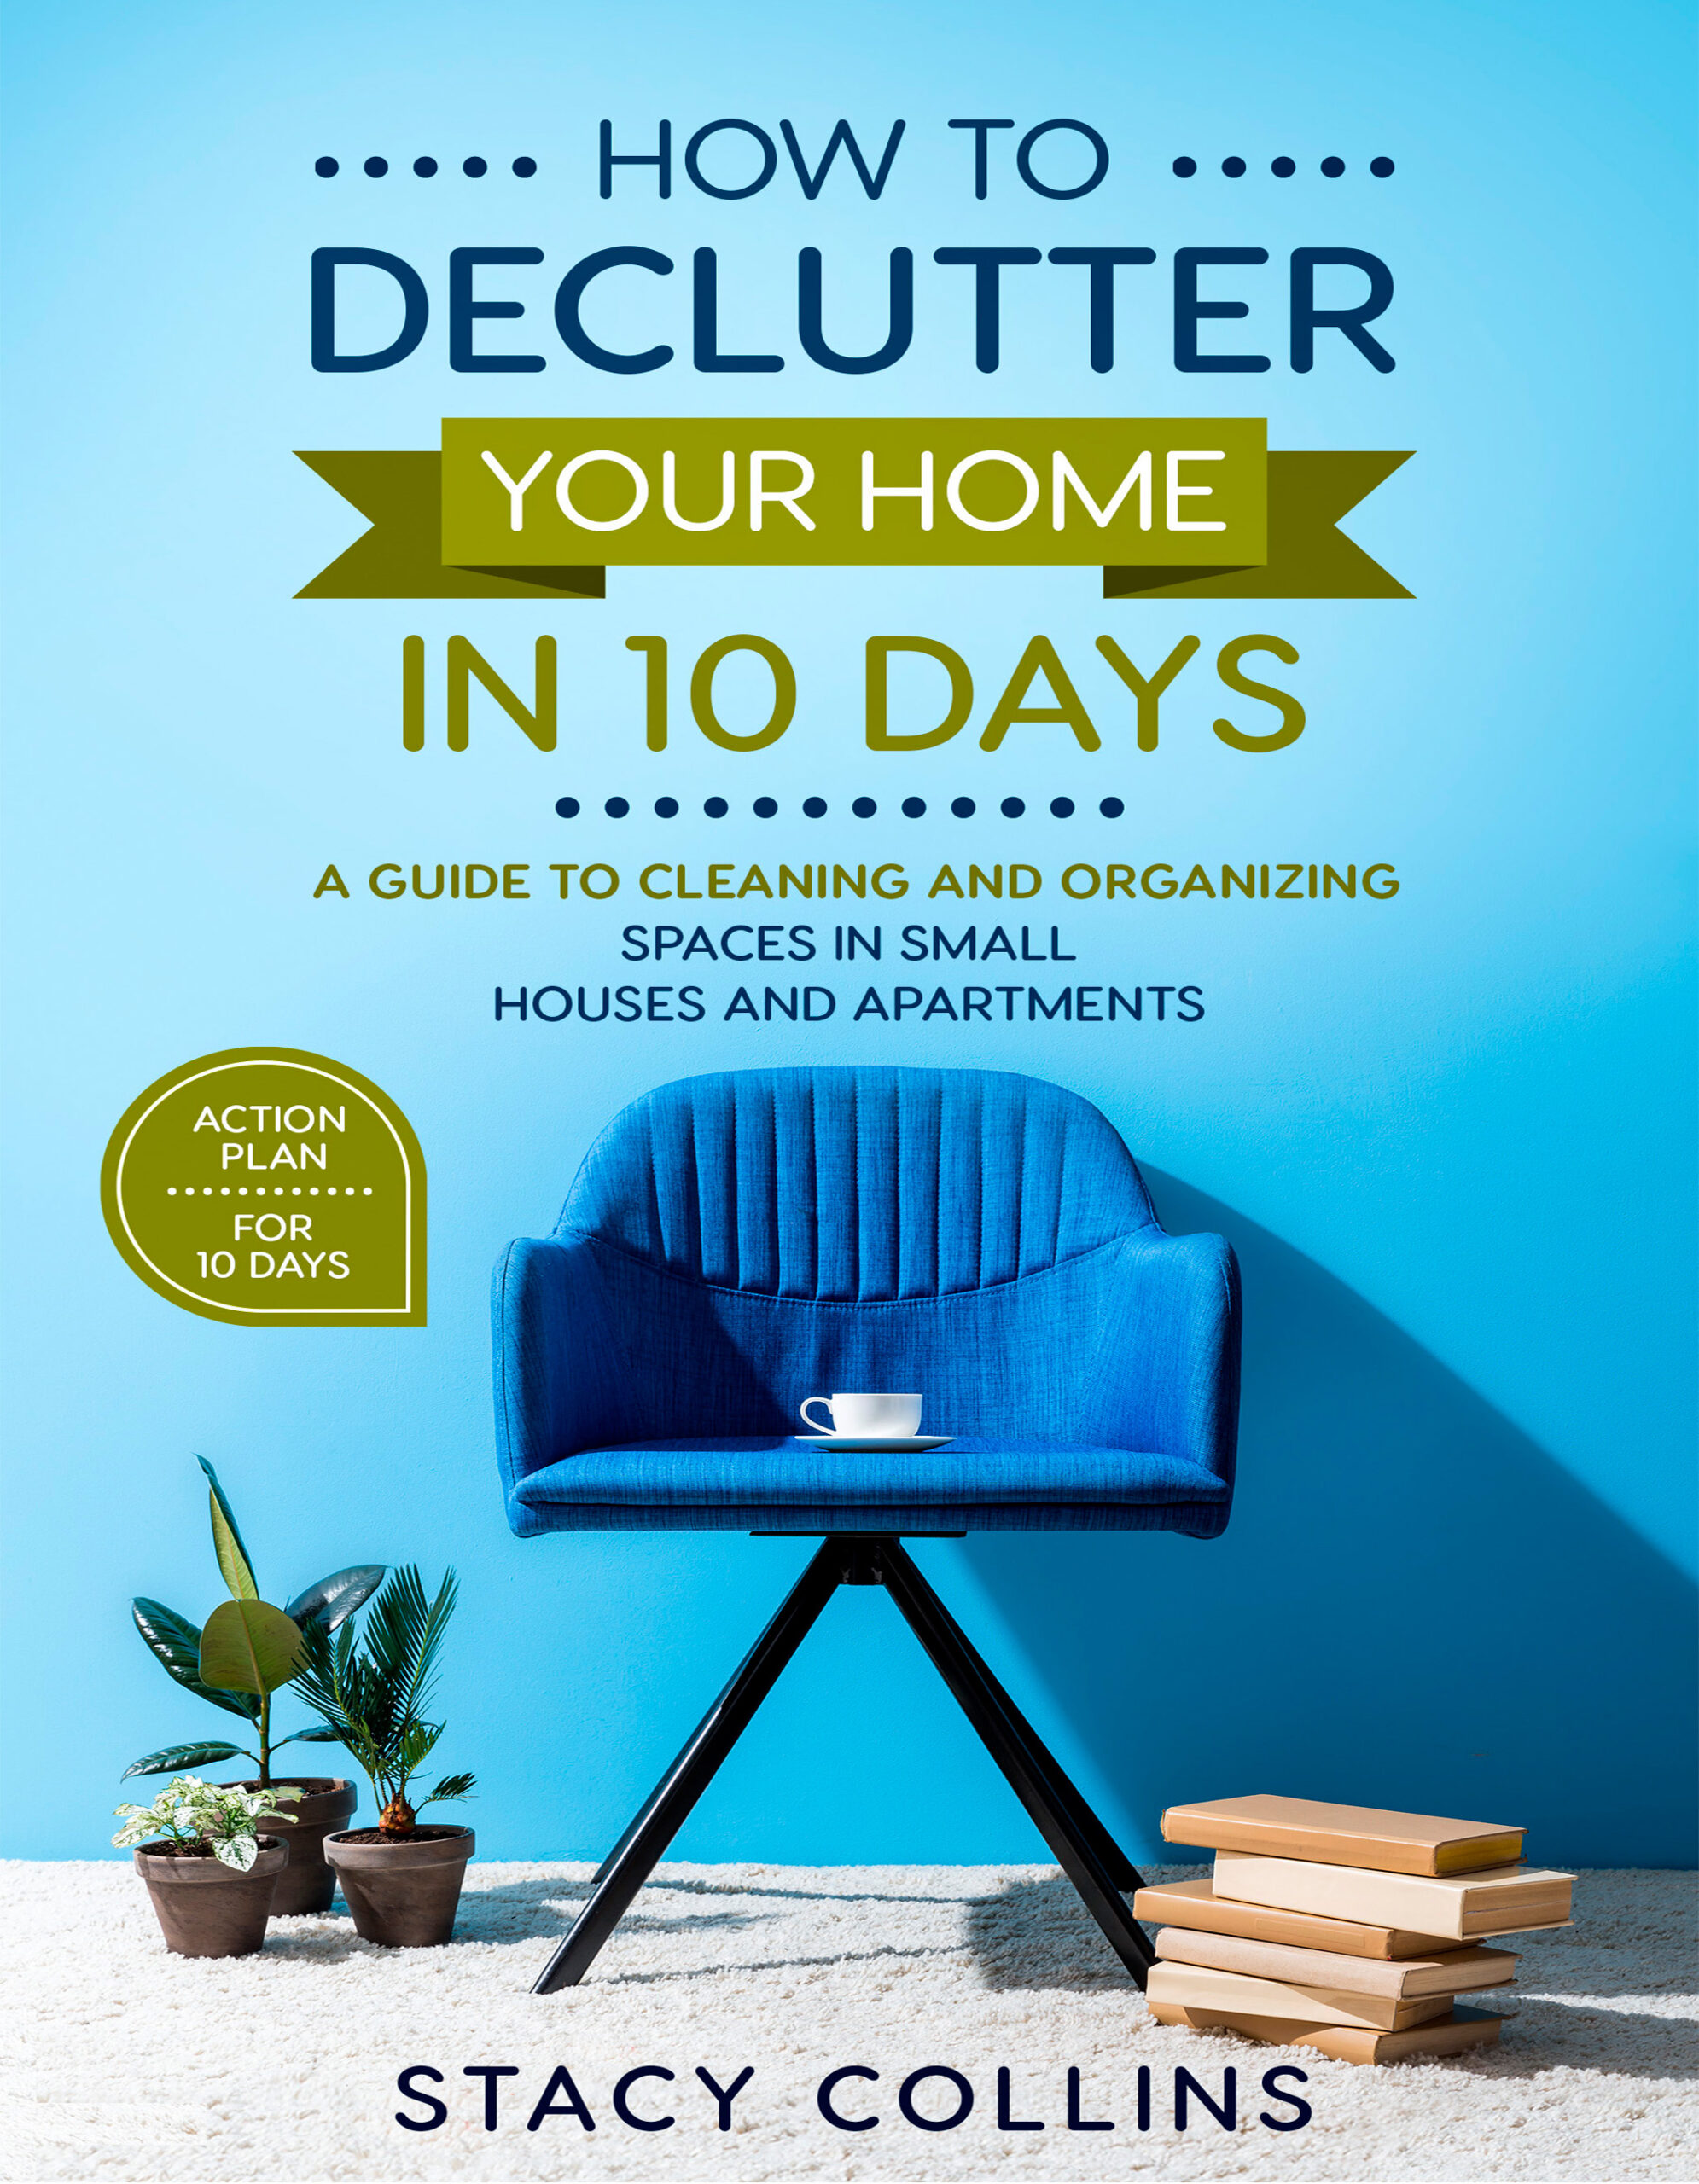 FREE: How to Declutter Your Home in10 Days: A Guide to Cleaning and Organizing Spaces in Small Houses and Apartments by Stacy Collins